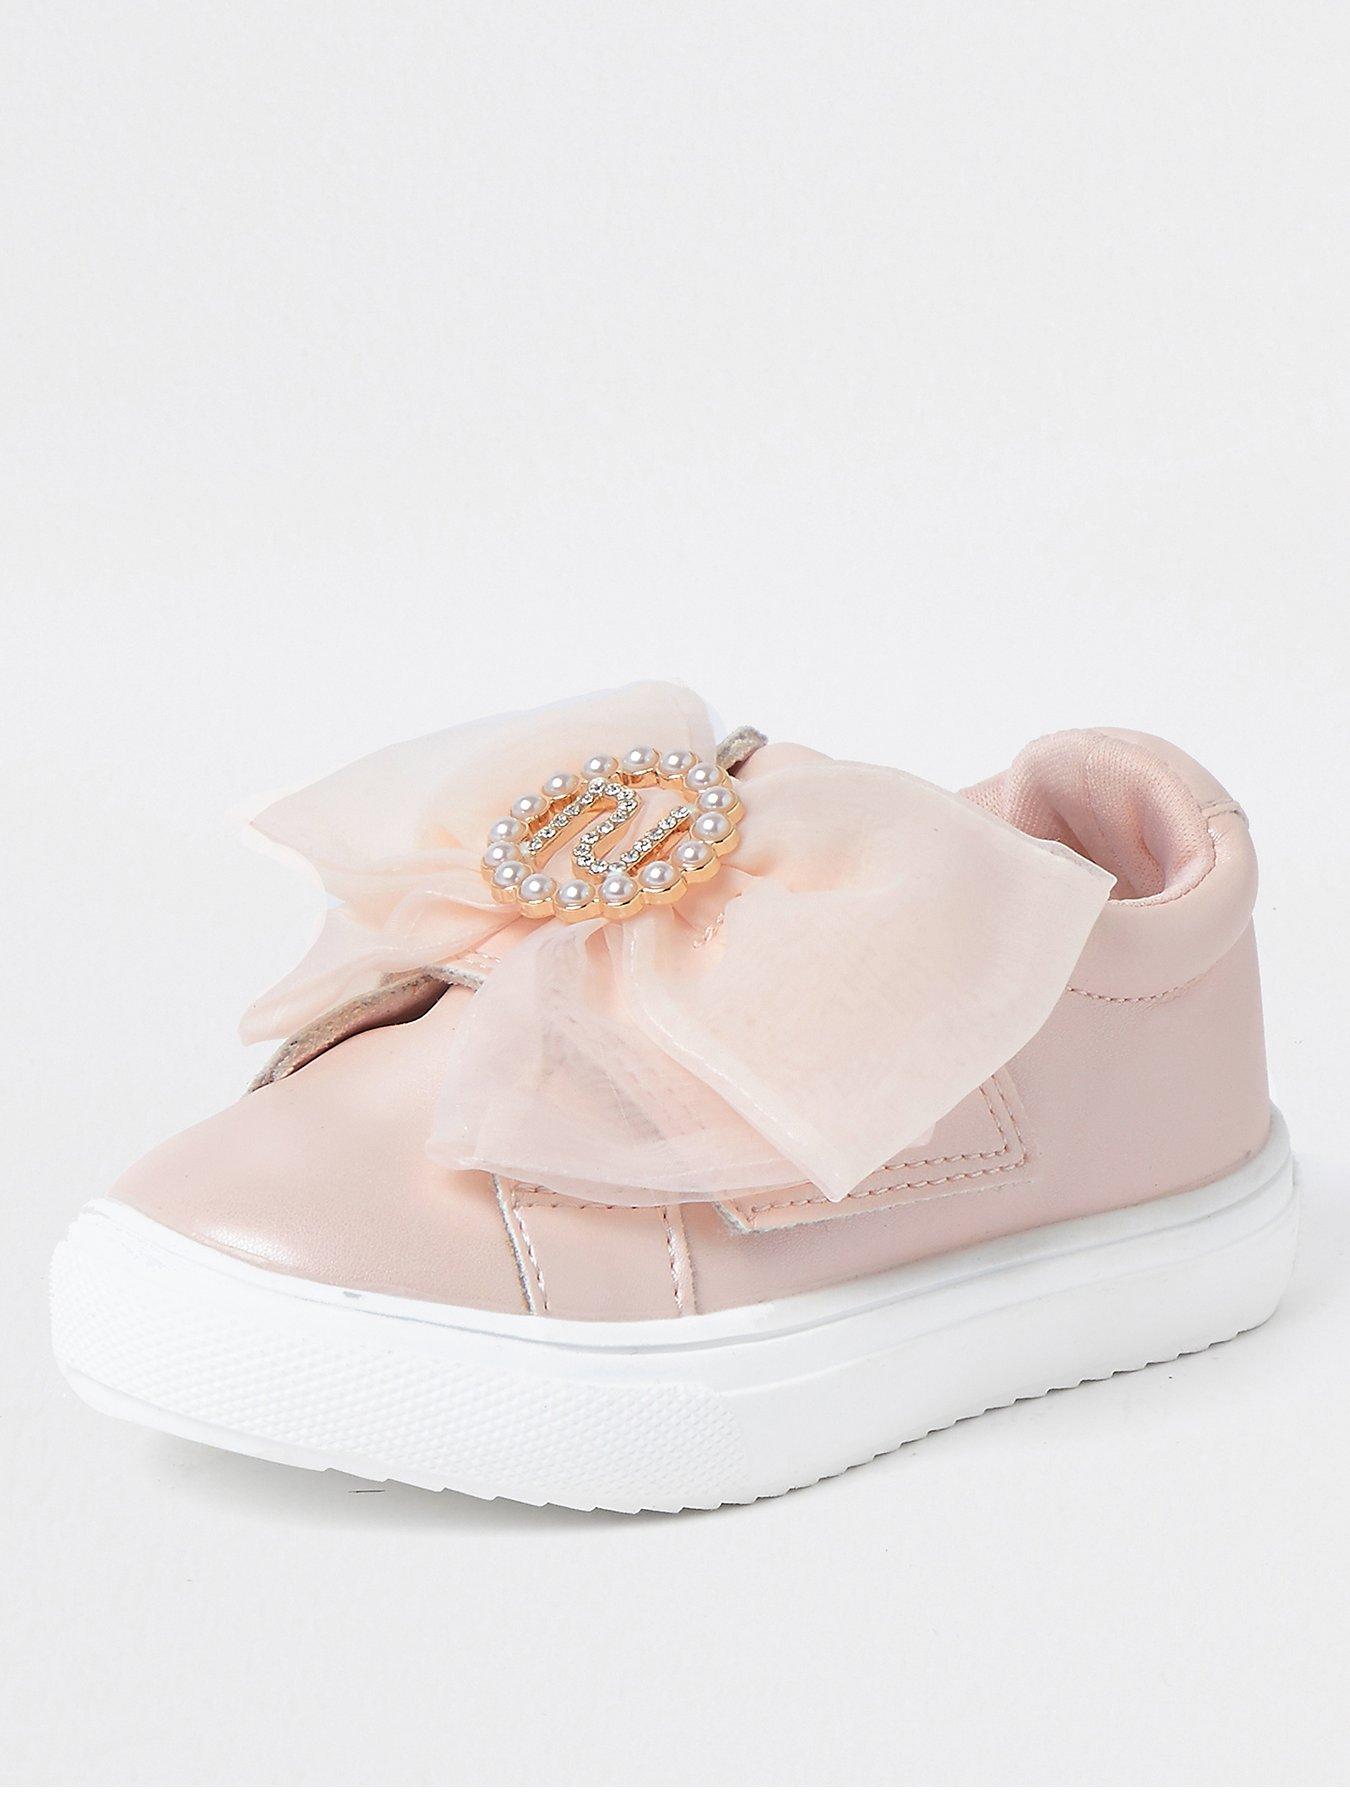 Infant footwear (sizes 0-9) | Trainers 